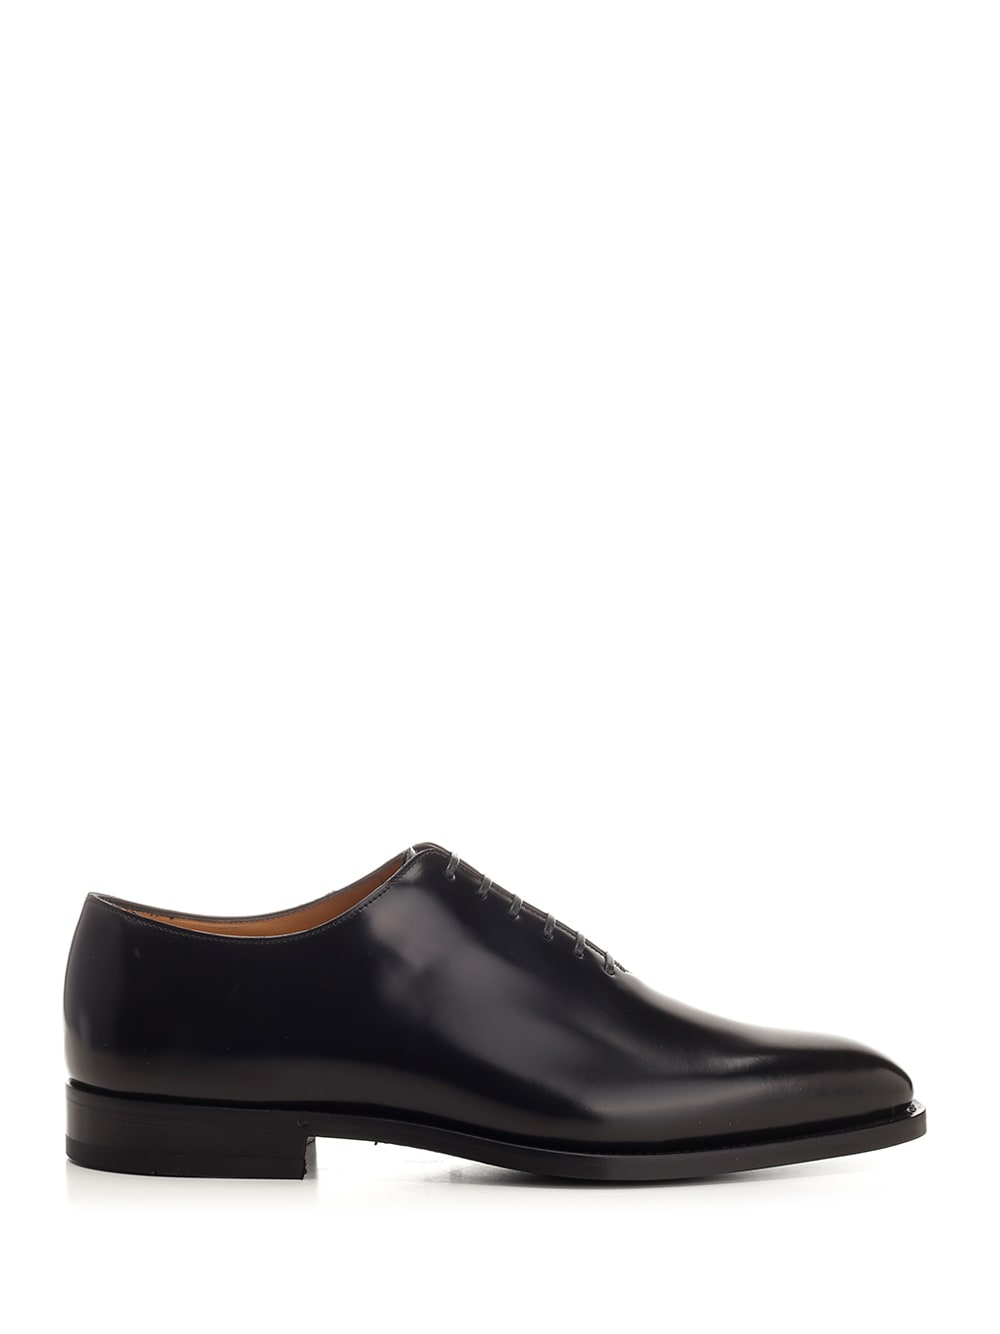 Black Oxfords With Square Toe